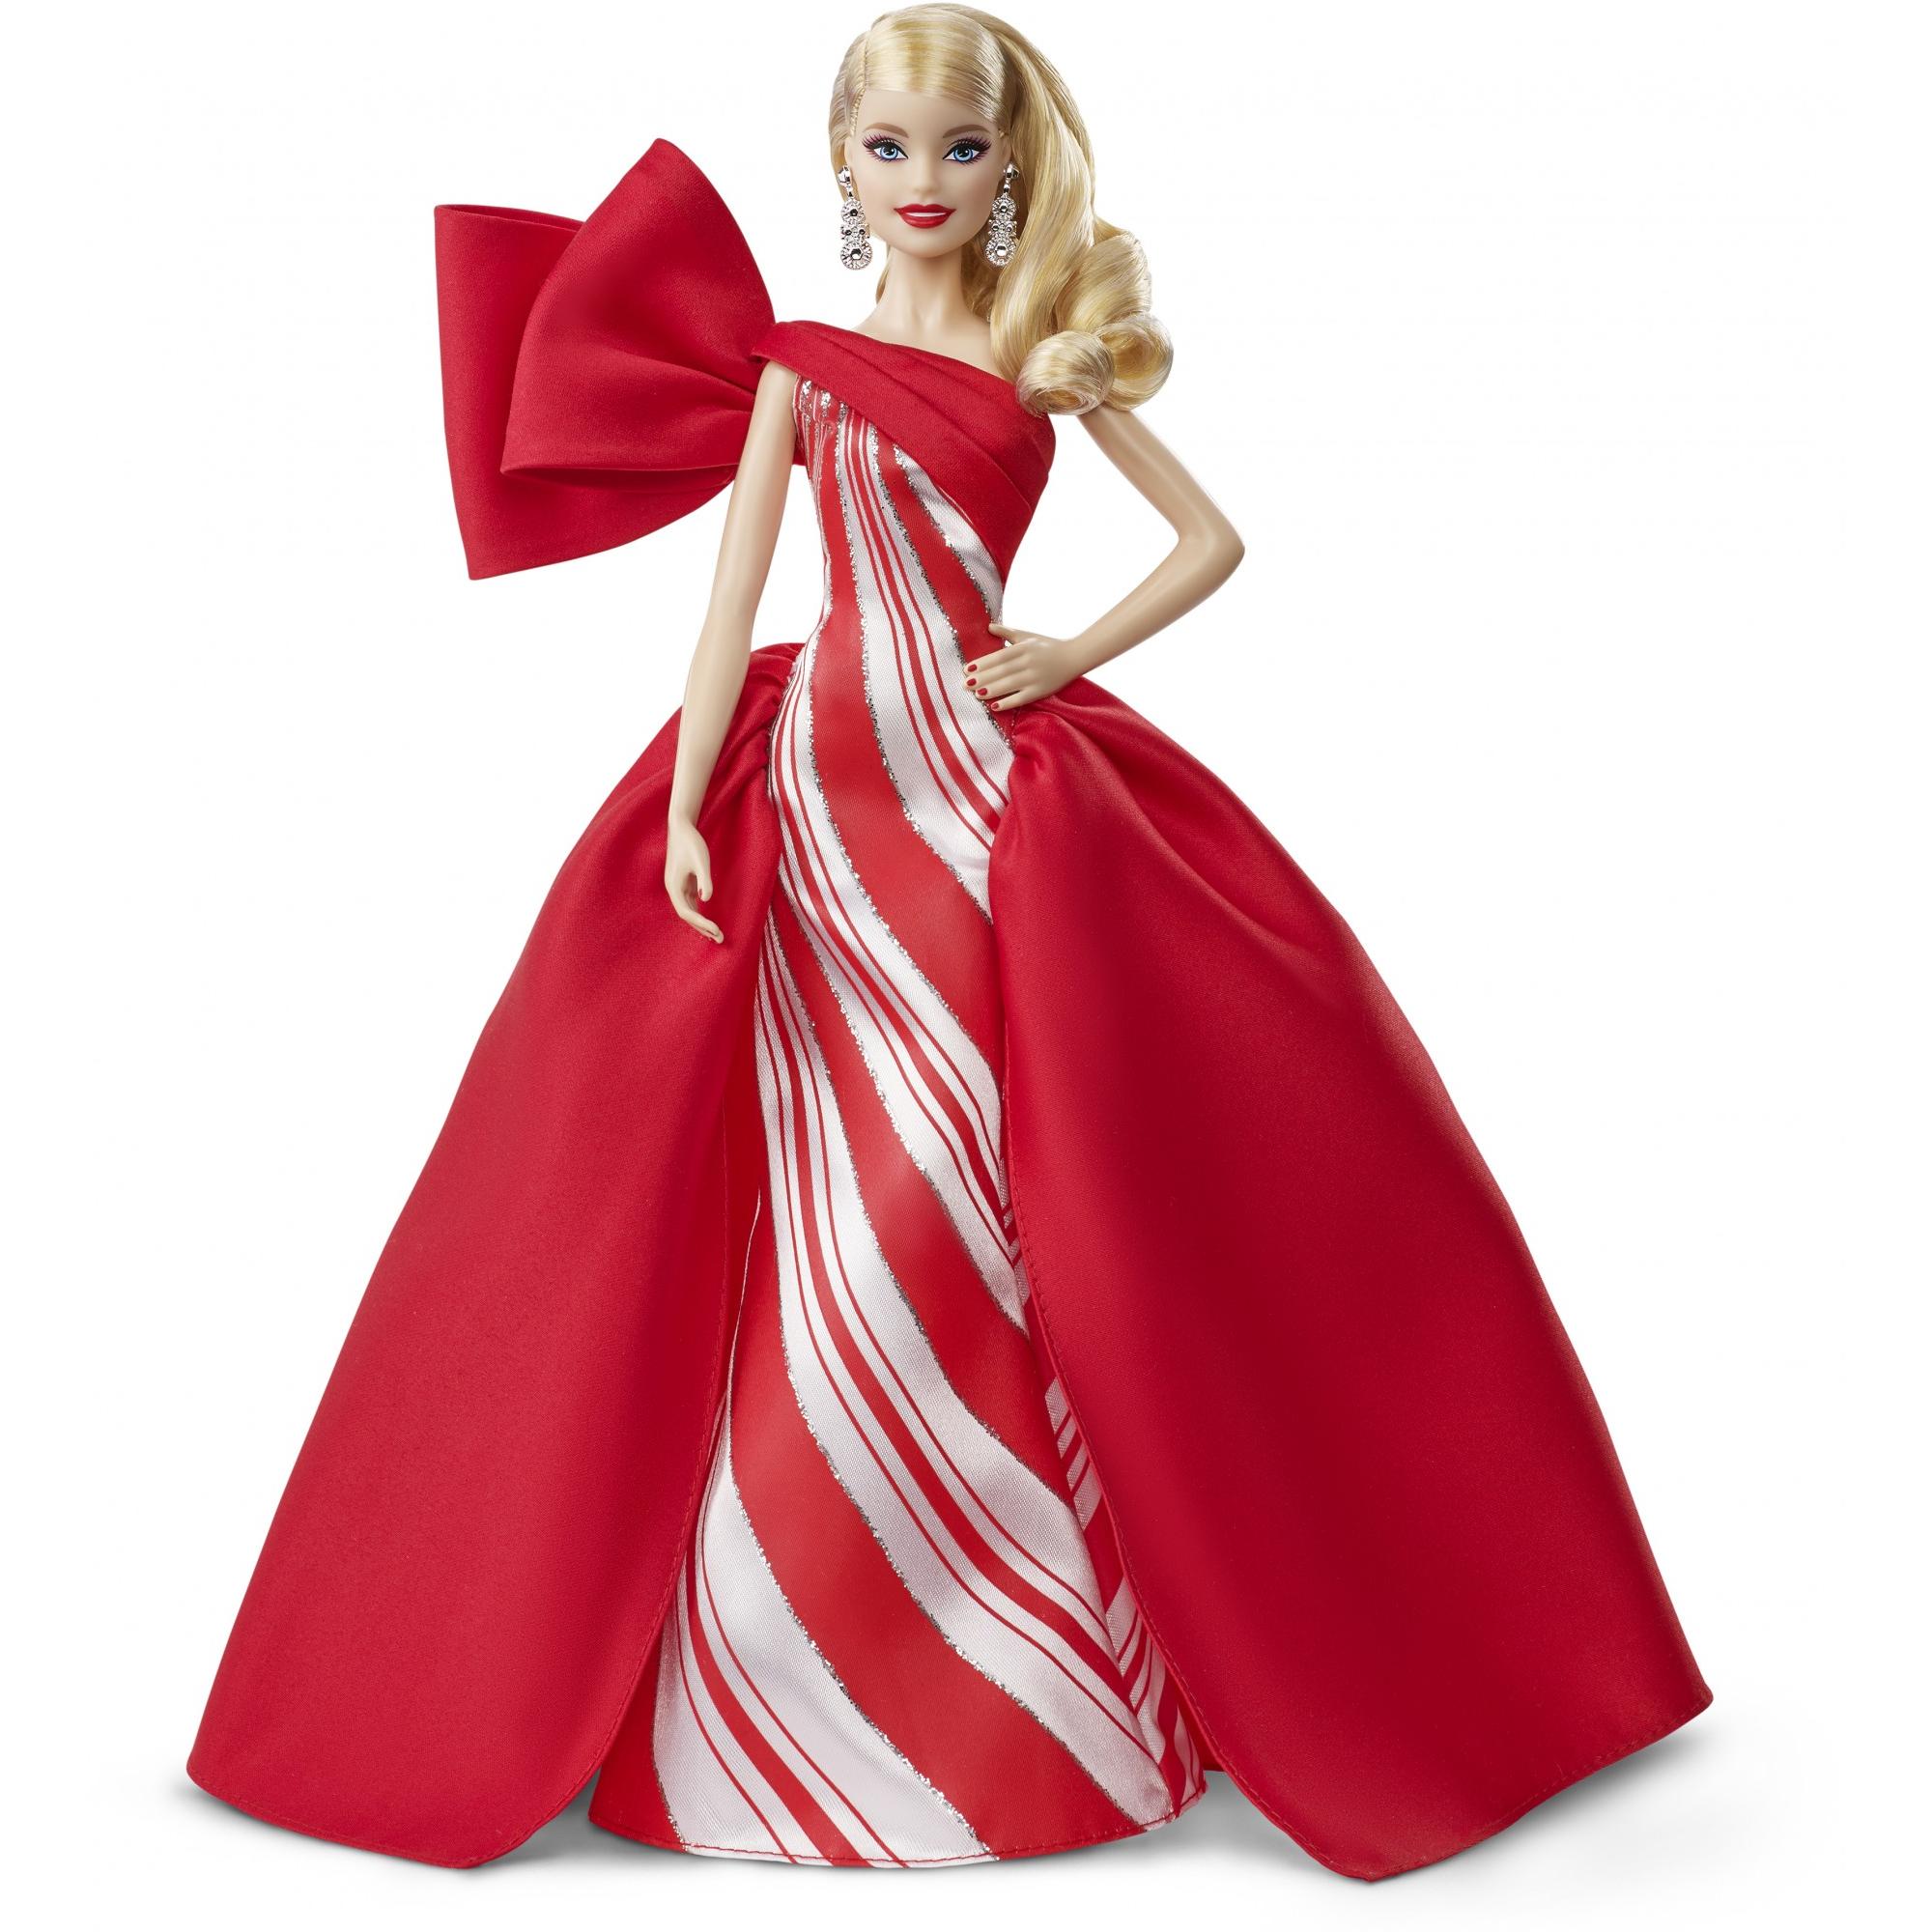 Barbie 2019 Holiday Doll, Blonde Curls with Red & White Gown - image 1 of 10